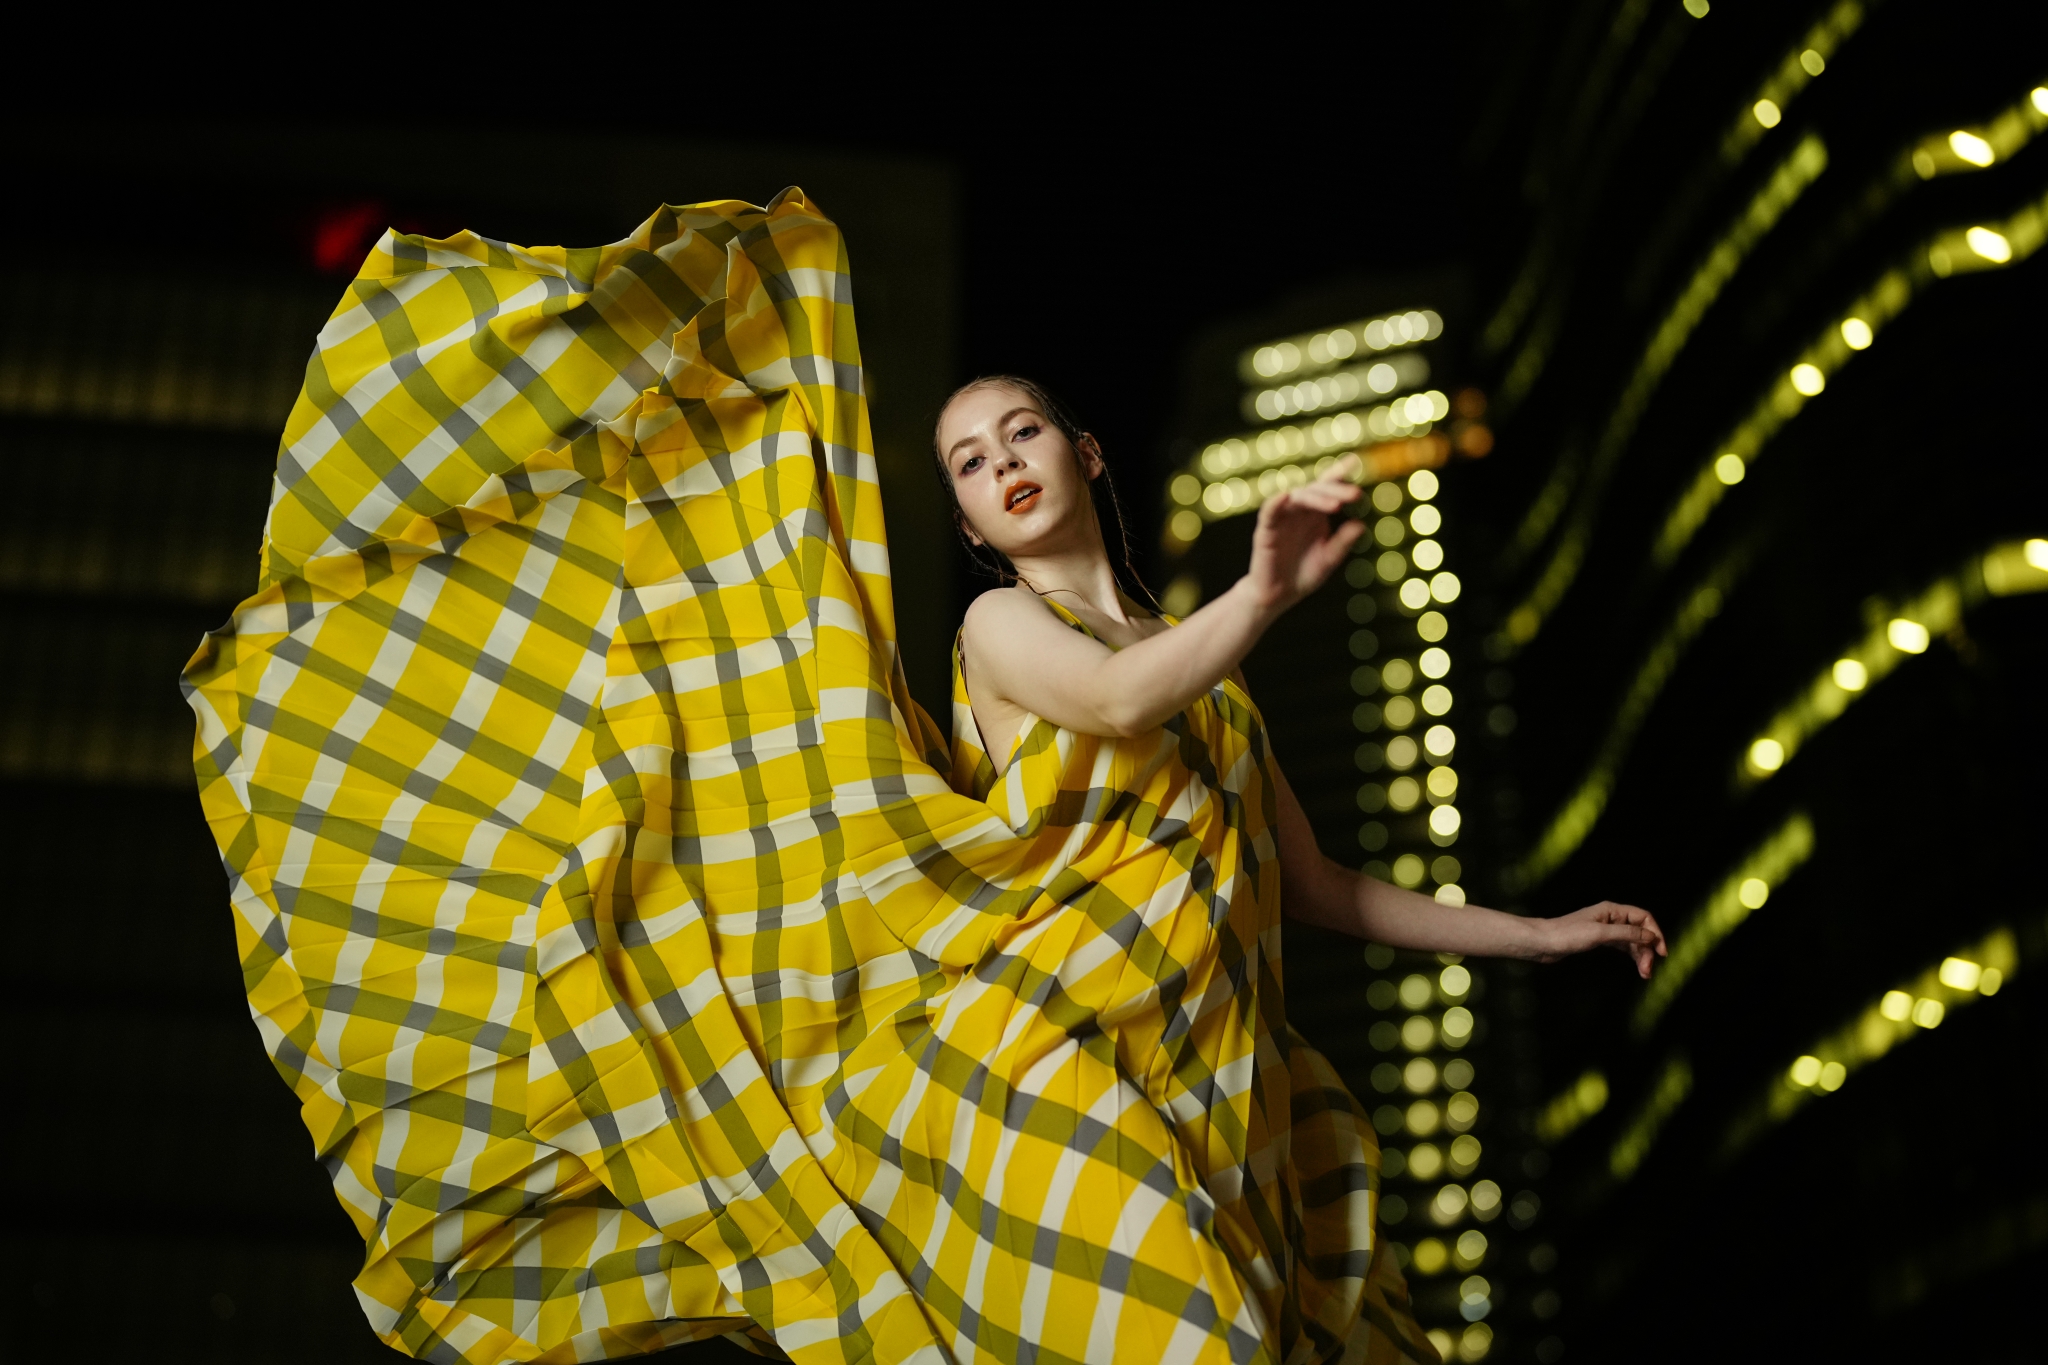 Female model at night wearing a yellow billowy dress with a tall building in the background